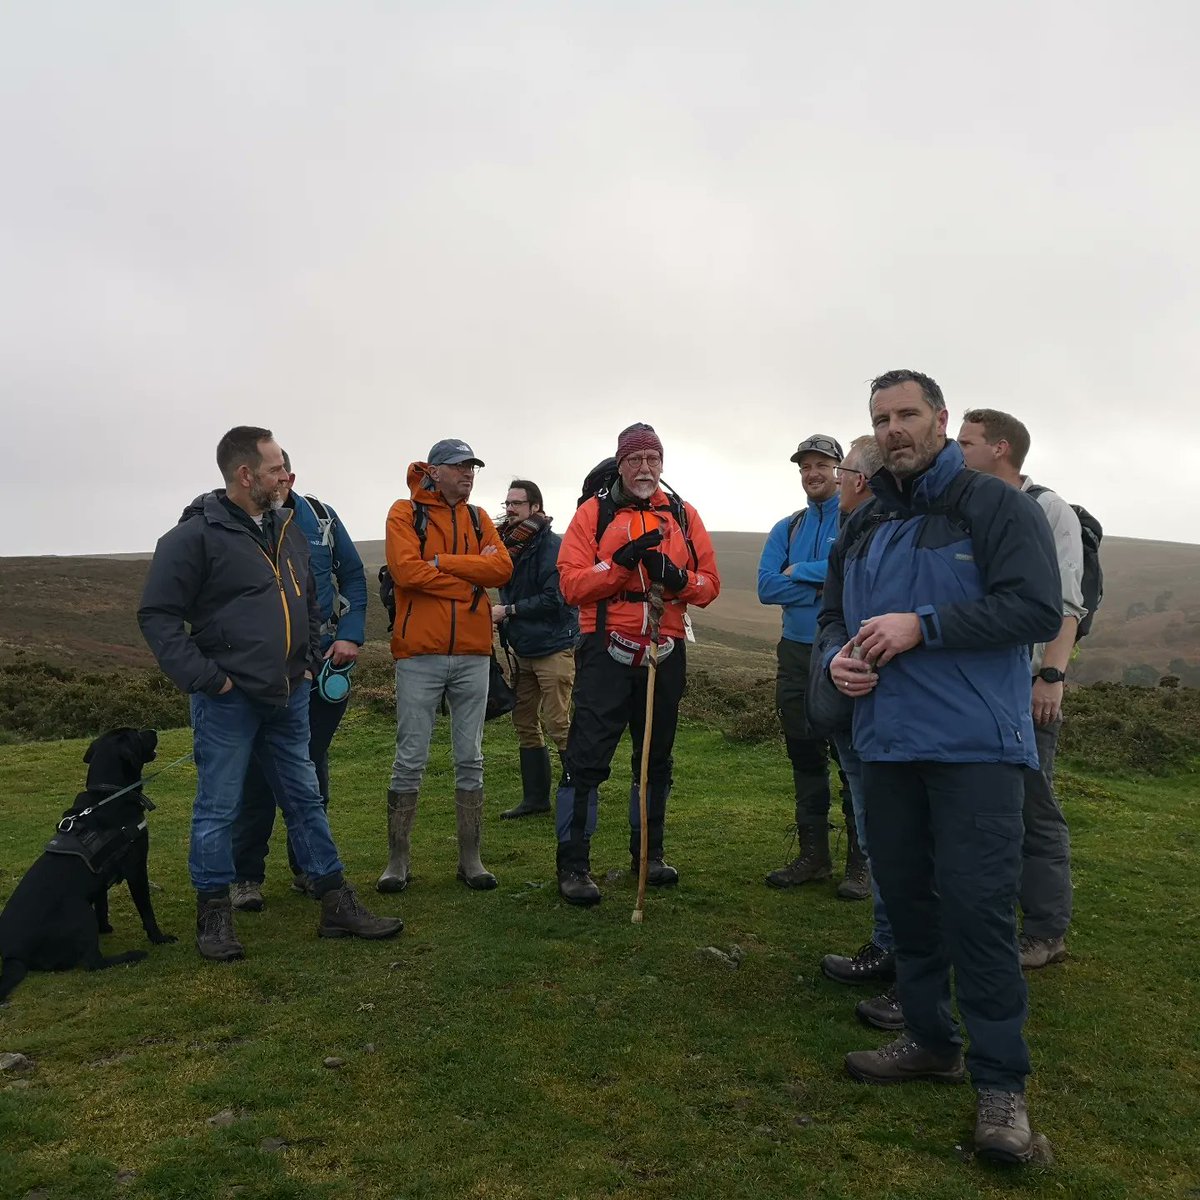 To celebrate @UKMensDay we held our 2nd 'MenTalk' event with Somerset @MindCharity walking Quantocks guided by Ranger Roger Habgood followed by Sunday Roast #WalkWithMe 🚶🚶‍♂️ Thank you everyone who joined us. If you fancy getting involved with our next event please get in touch.